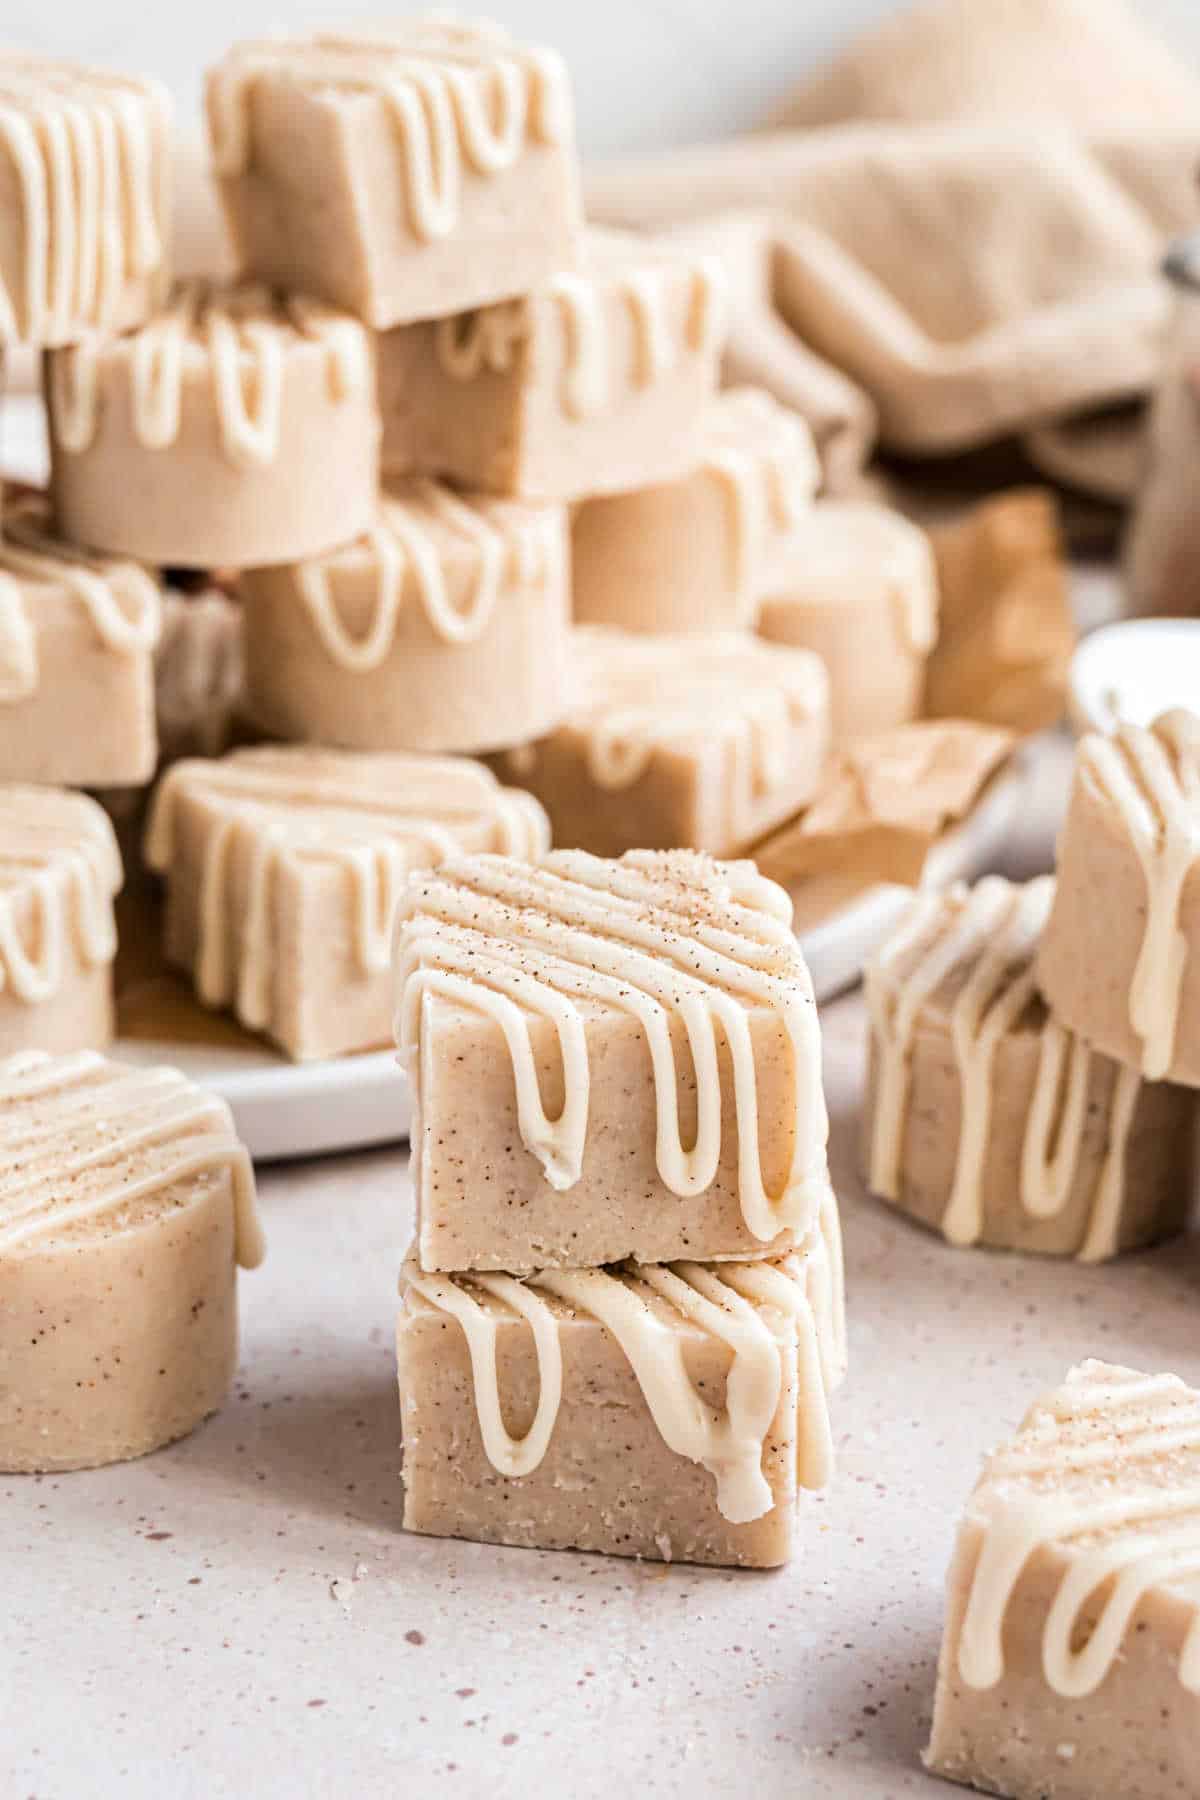 Pieces of cinnamon fudge stacked on parchment paper.